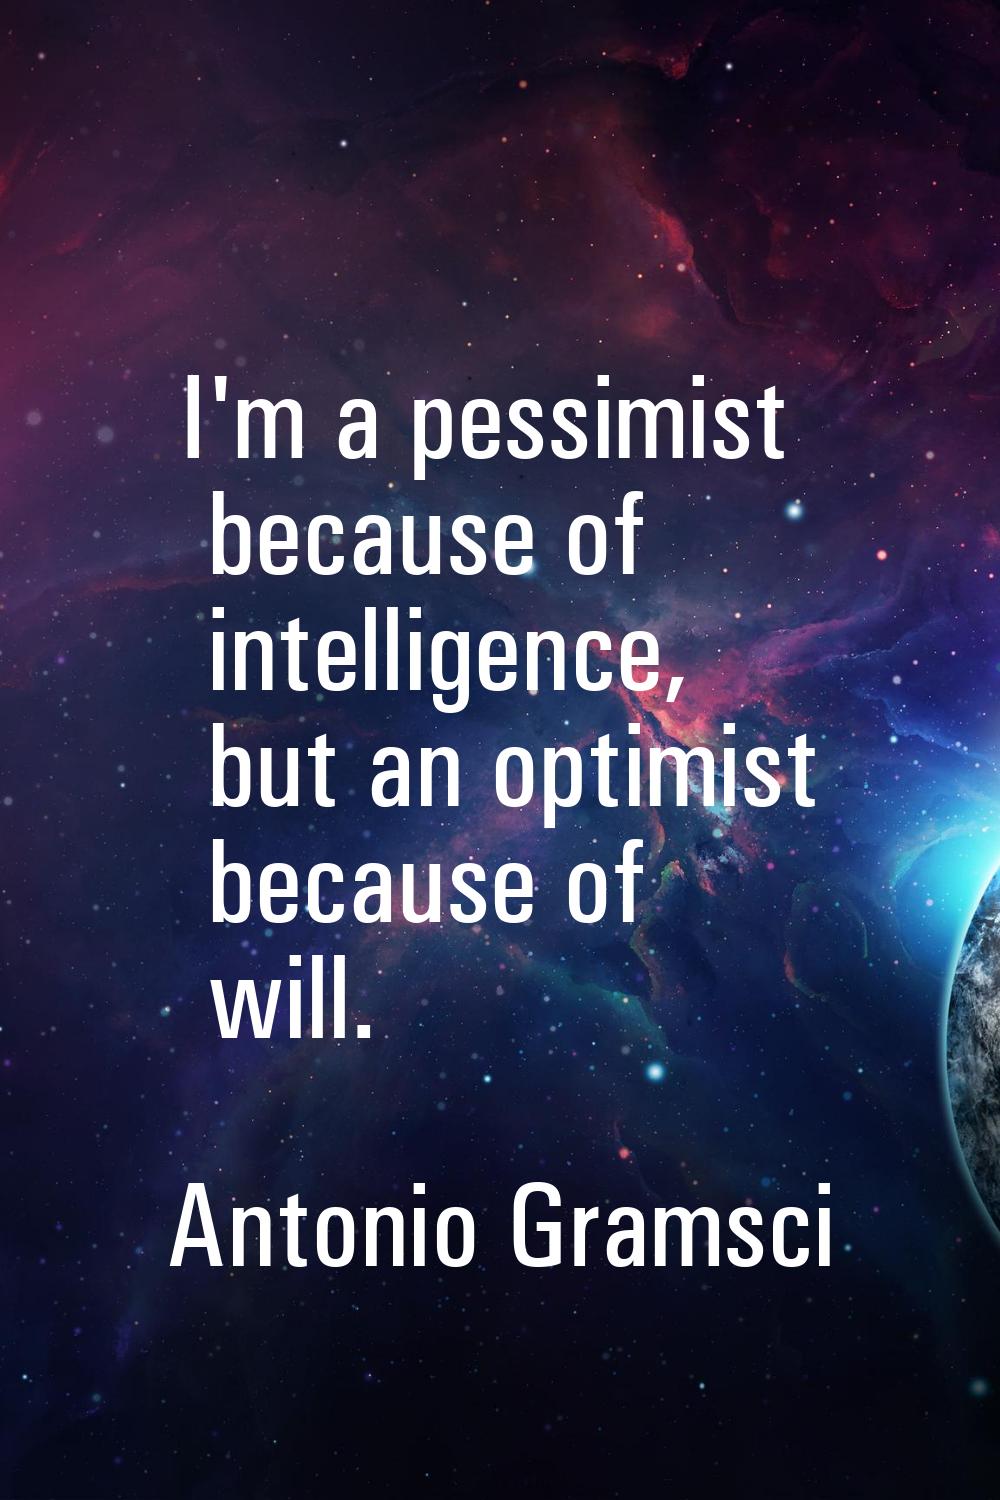 I'm a pessimist because of intelligence, but an optimist because of will.